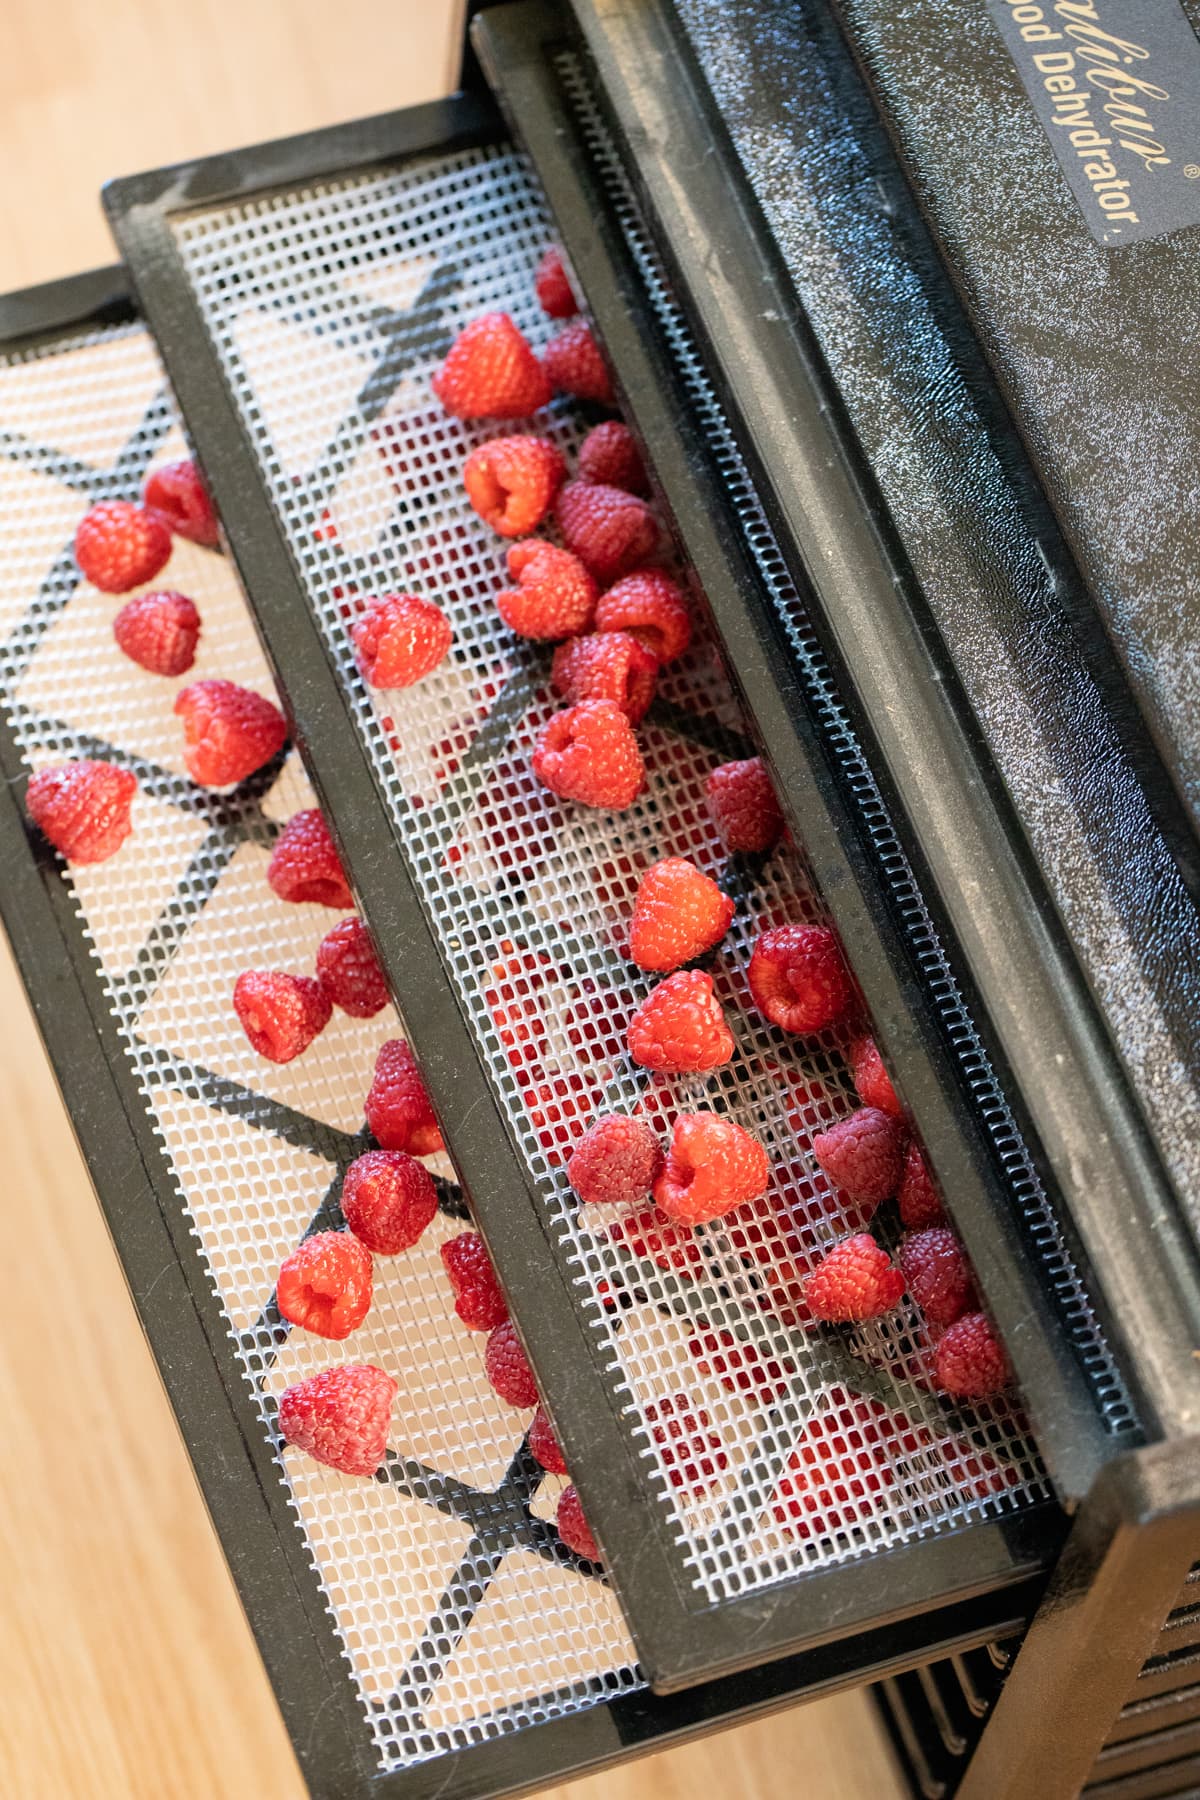 adding the trays to the dehydrator